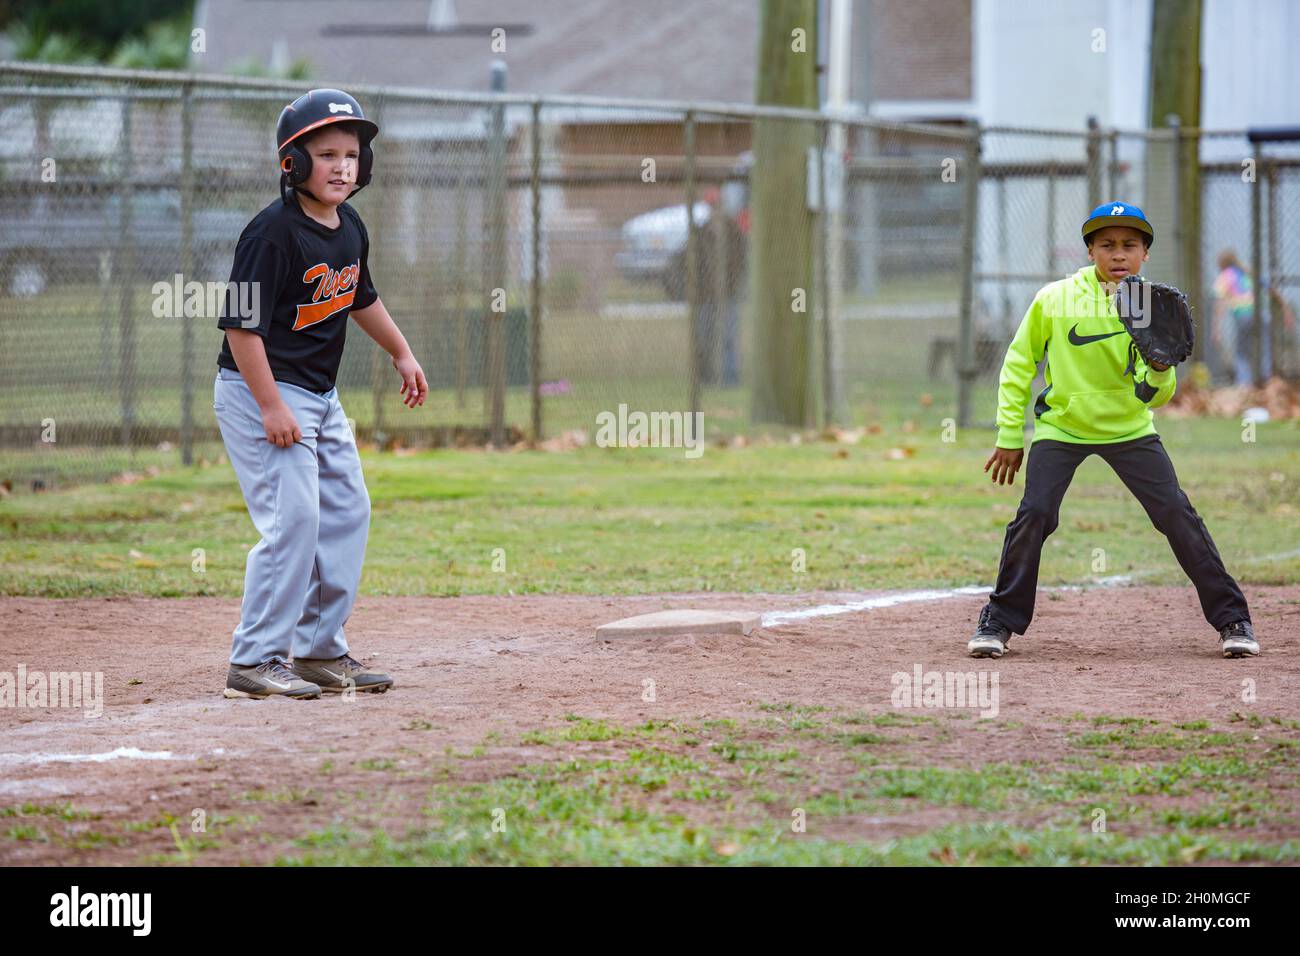 Young pre-teen male leading off at third base while playing baseball in uniform Stock Photo